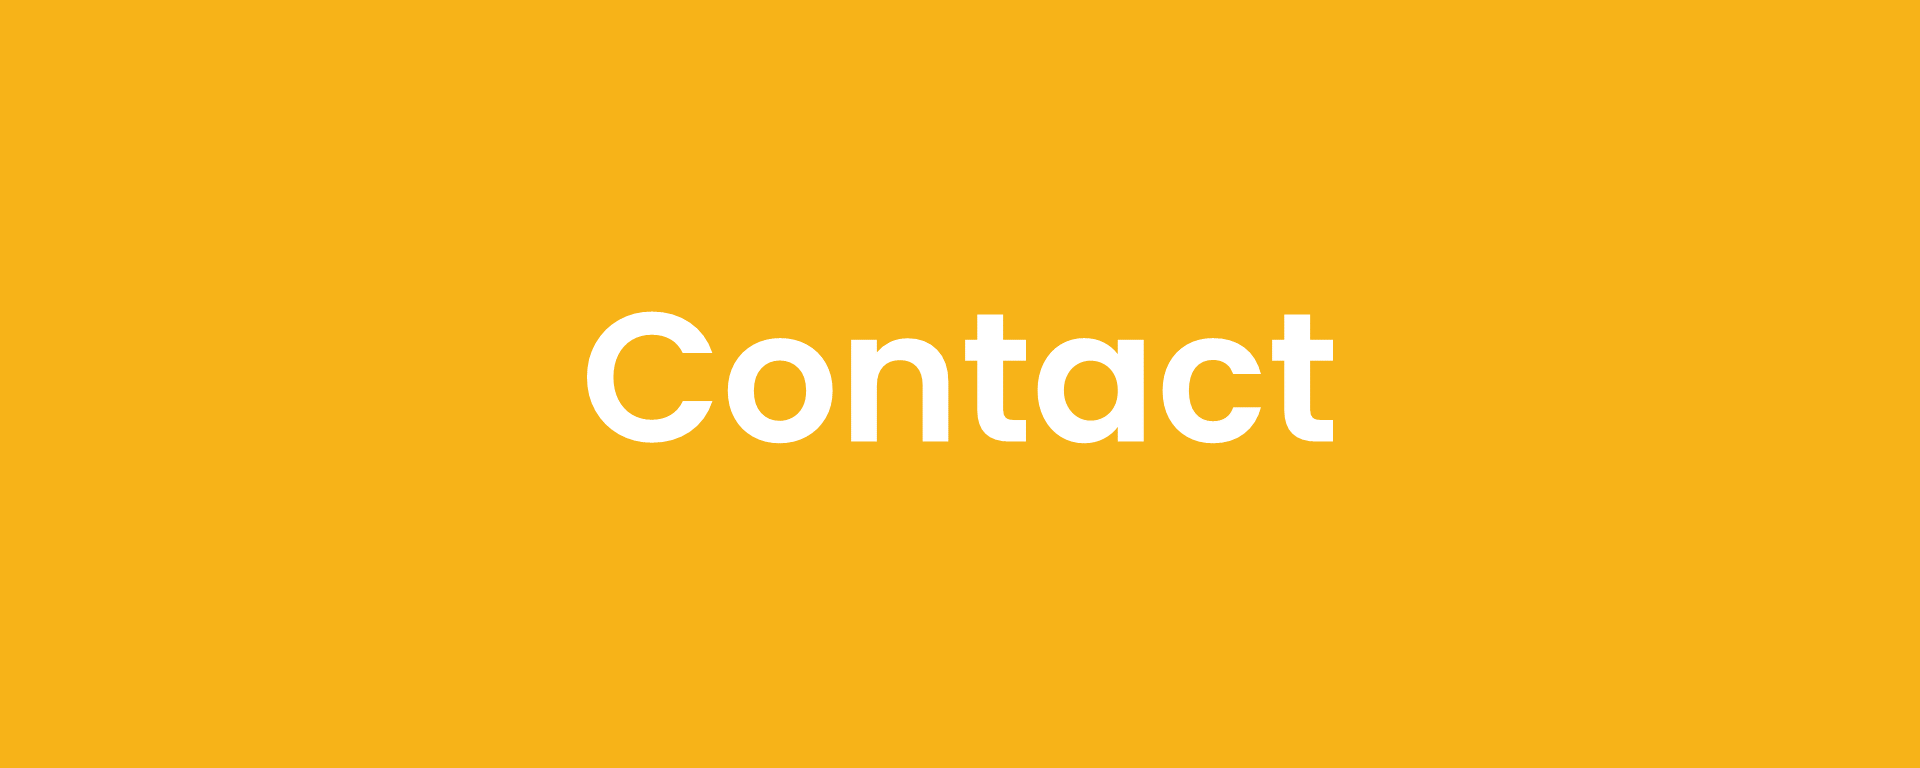 AR22_Contact Title.png